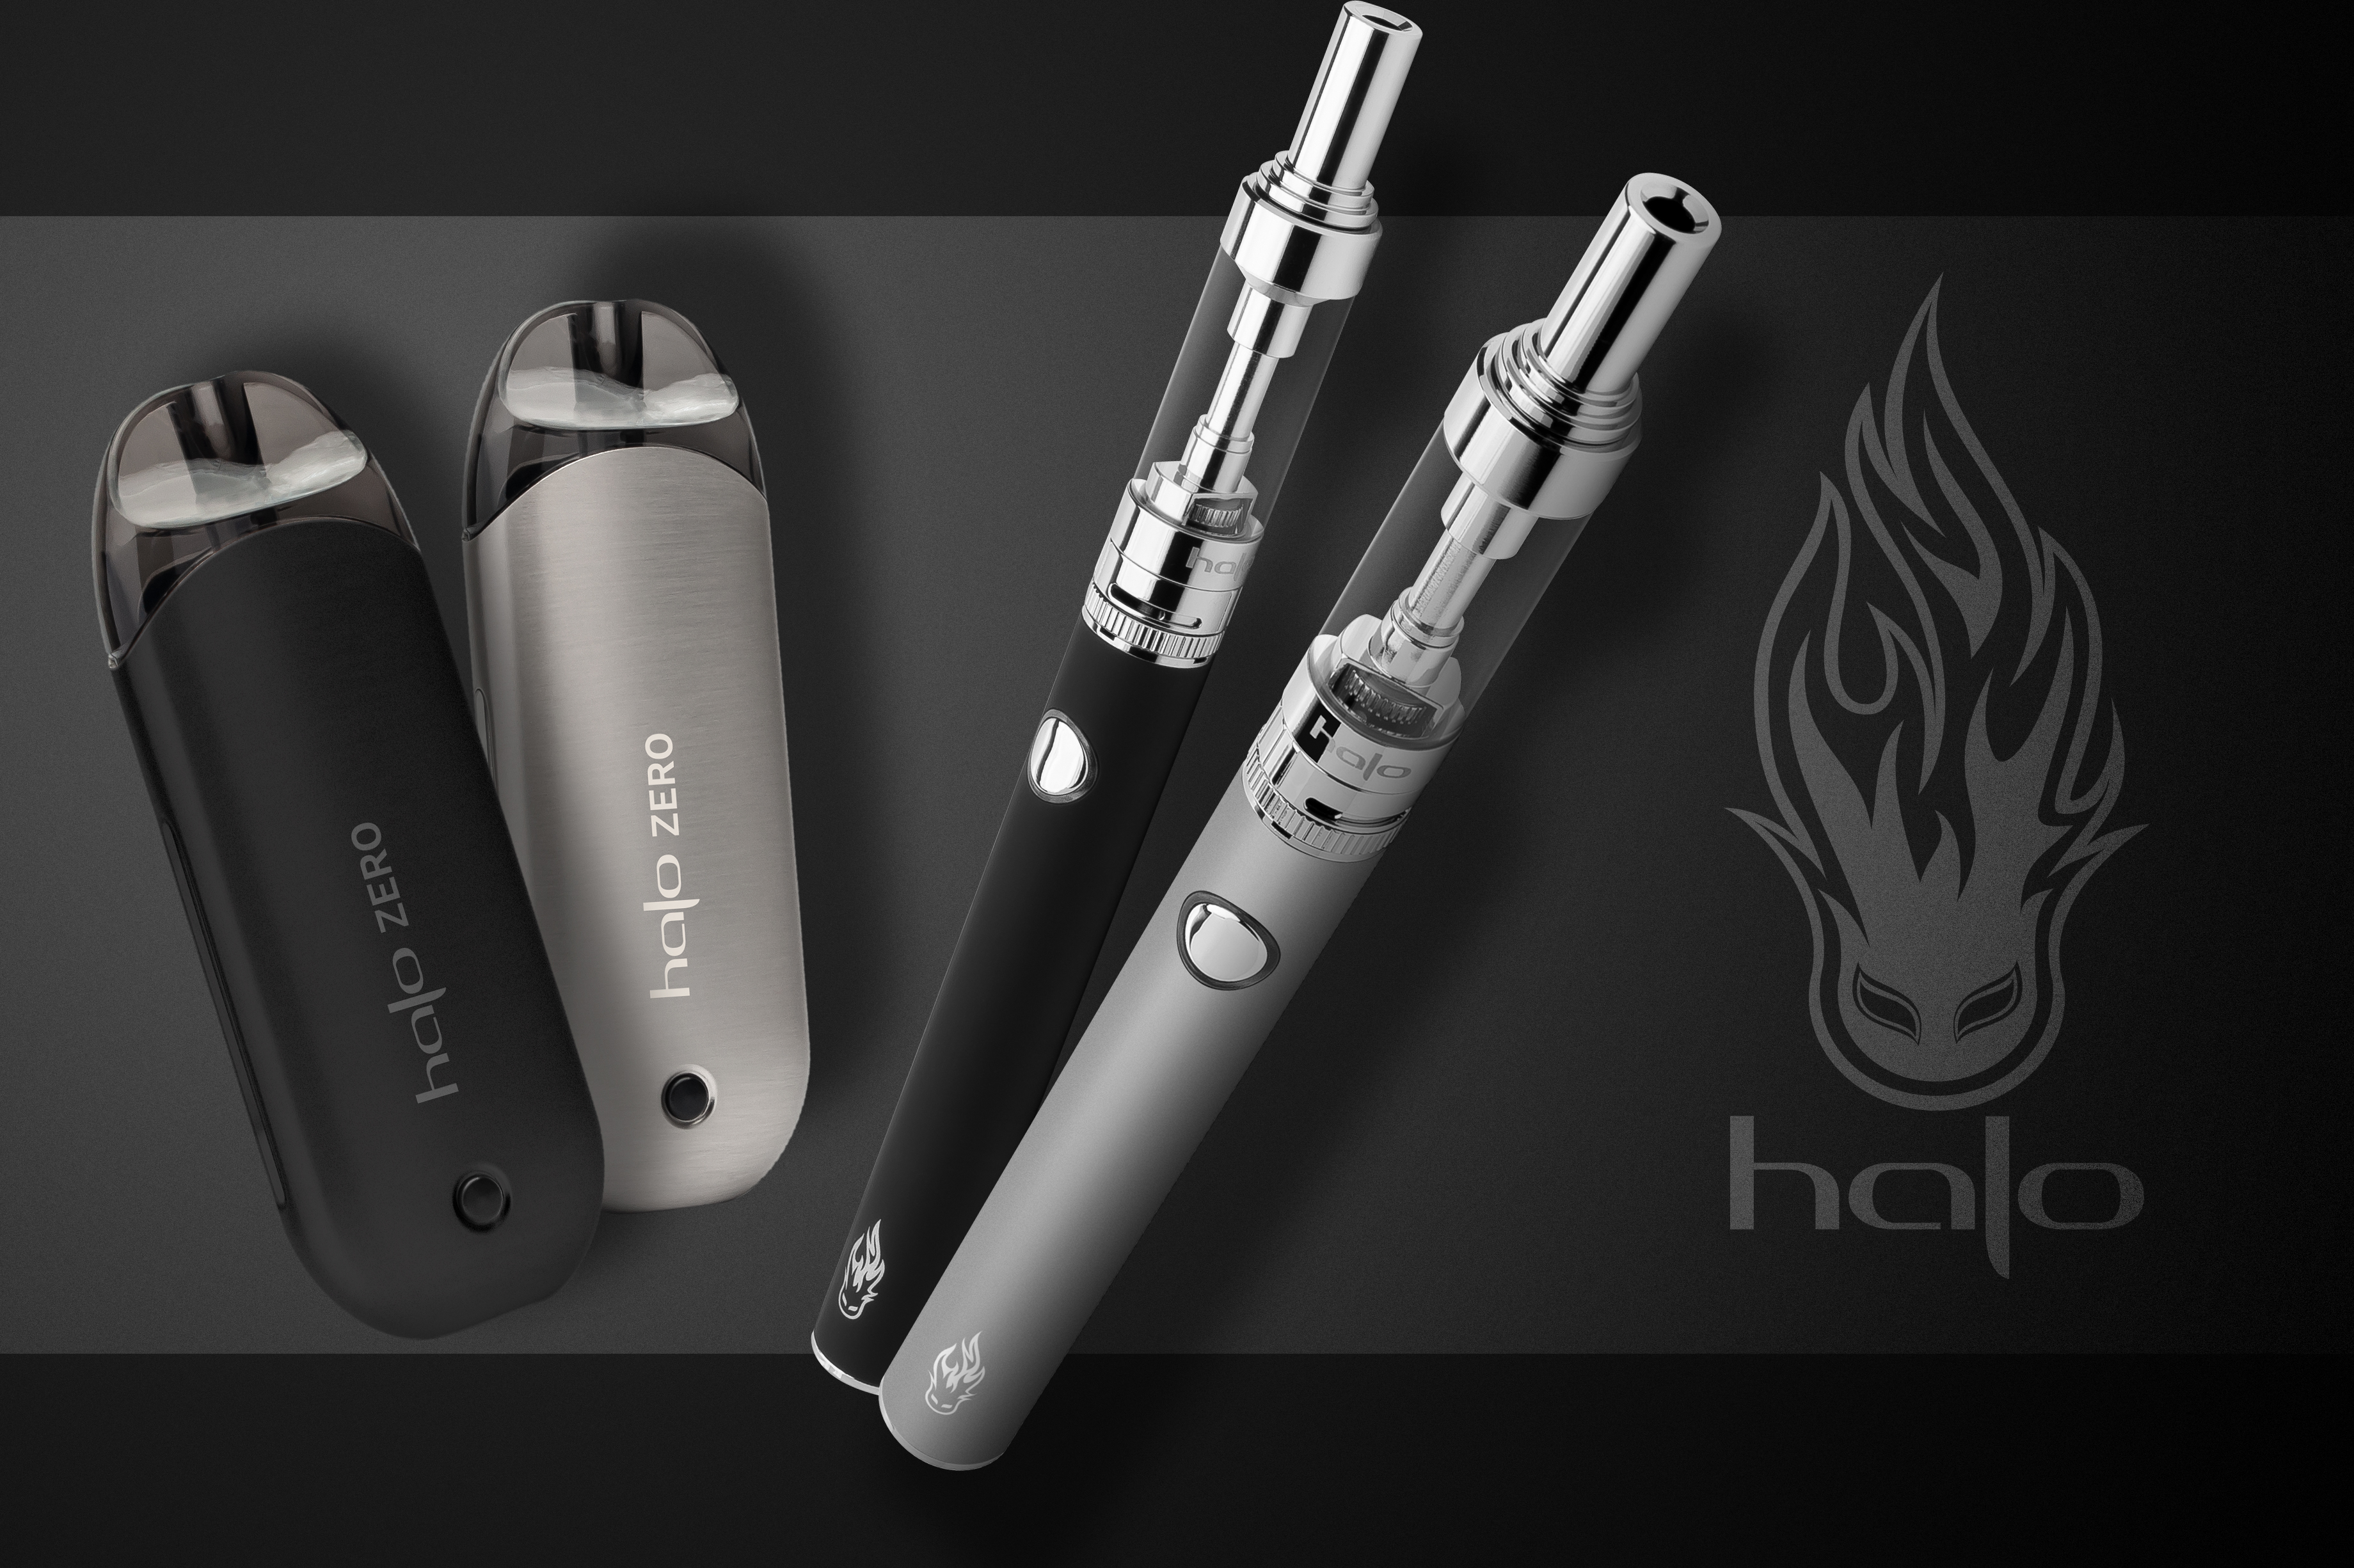 The FDA has accepted Nicopure's Premarket Tobacco Application for the Halo ZERO and Triton II Starter Kits and supporting consumable components for Substantive Scientific Review.